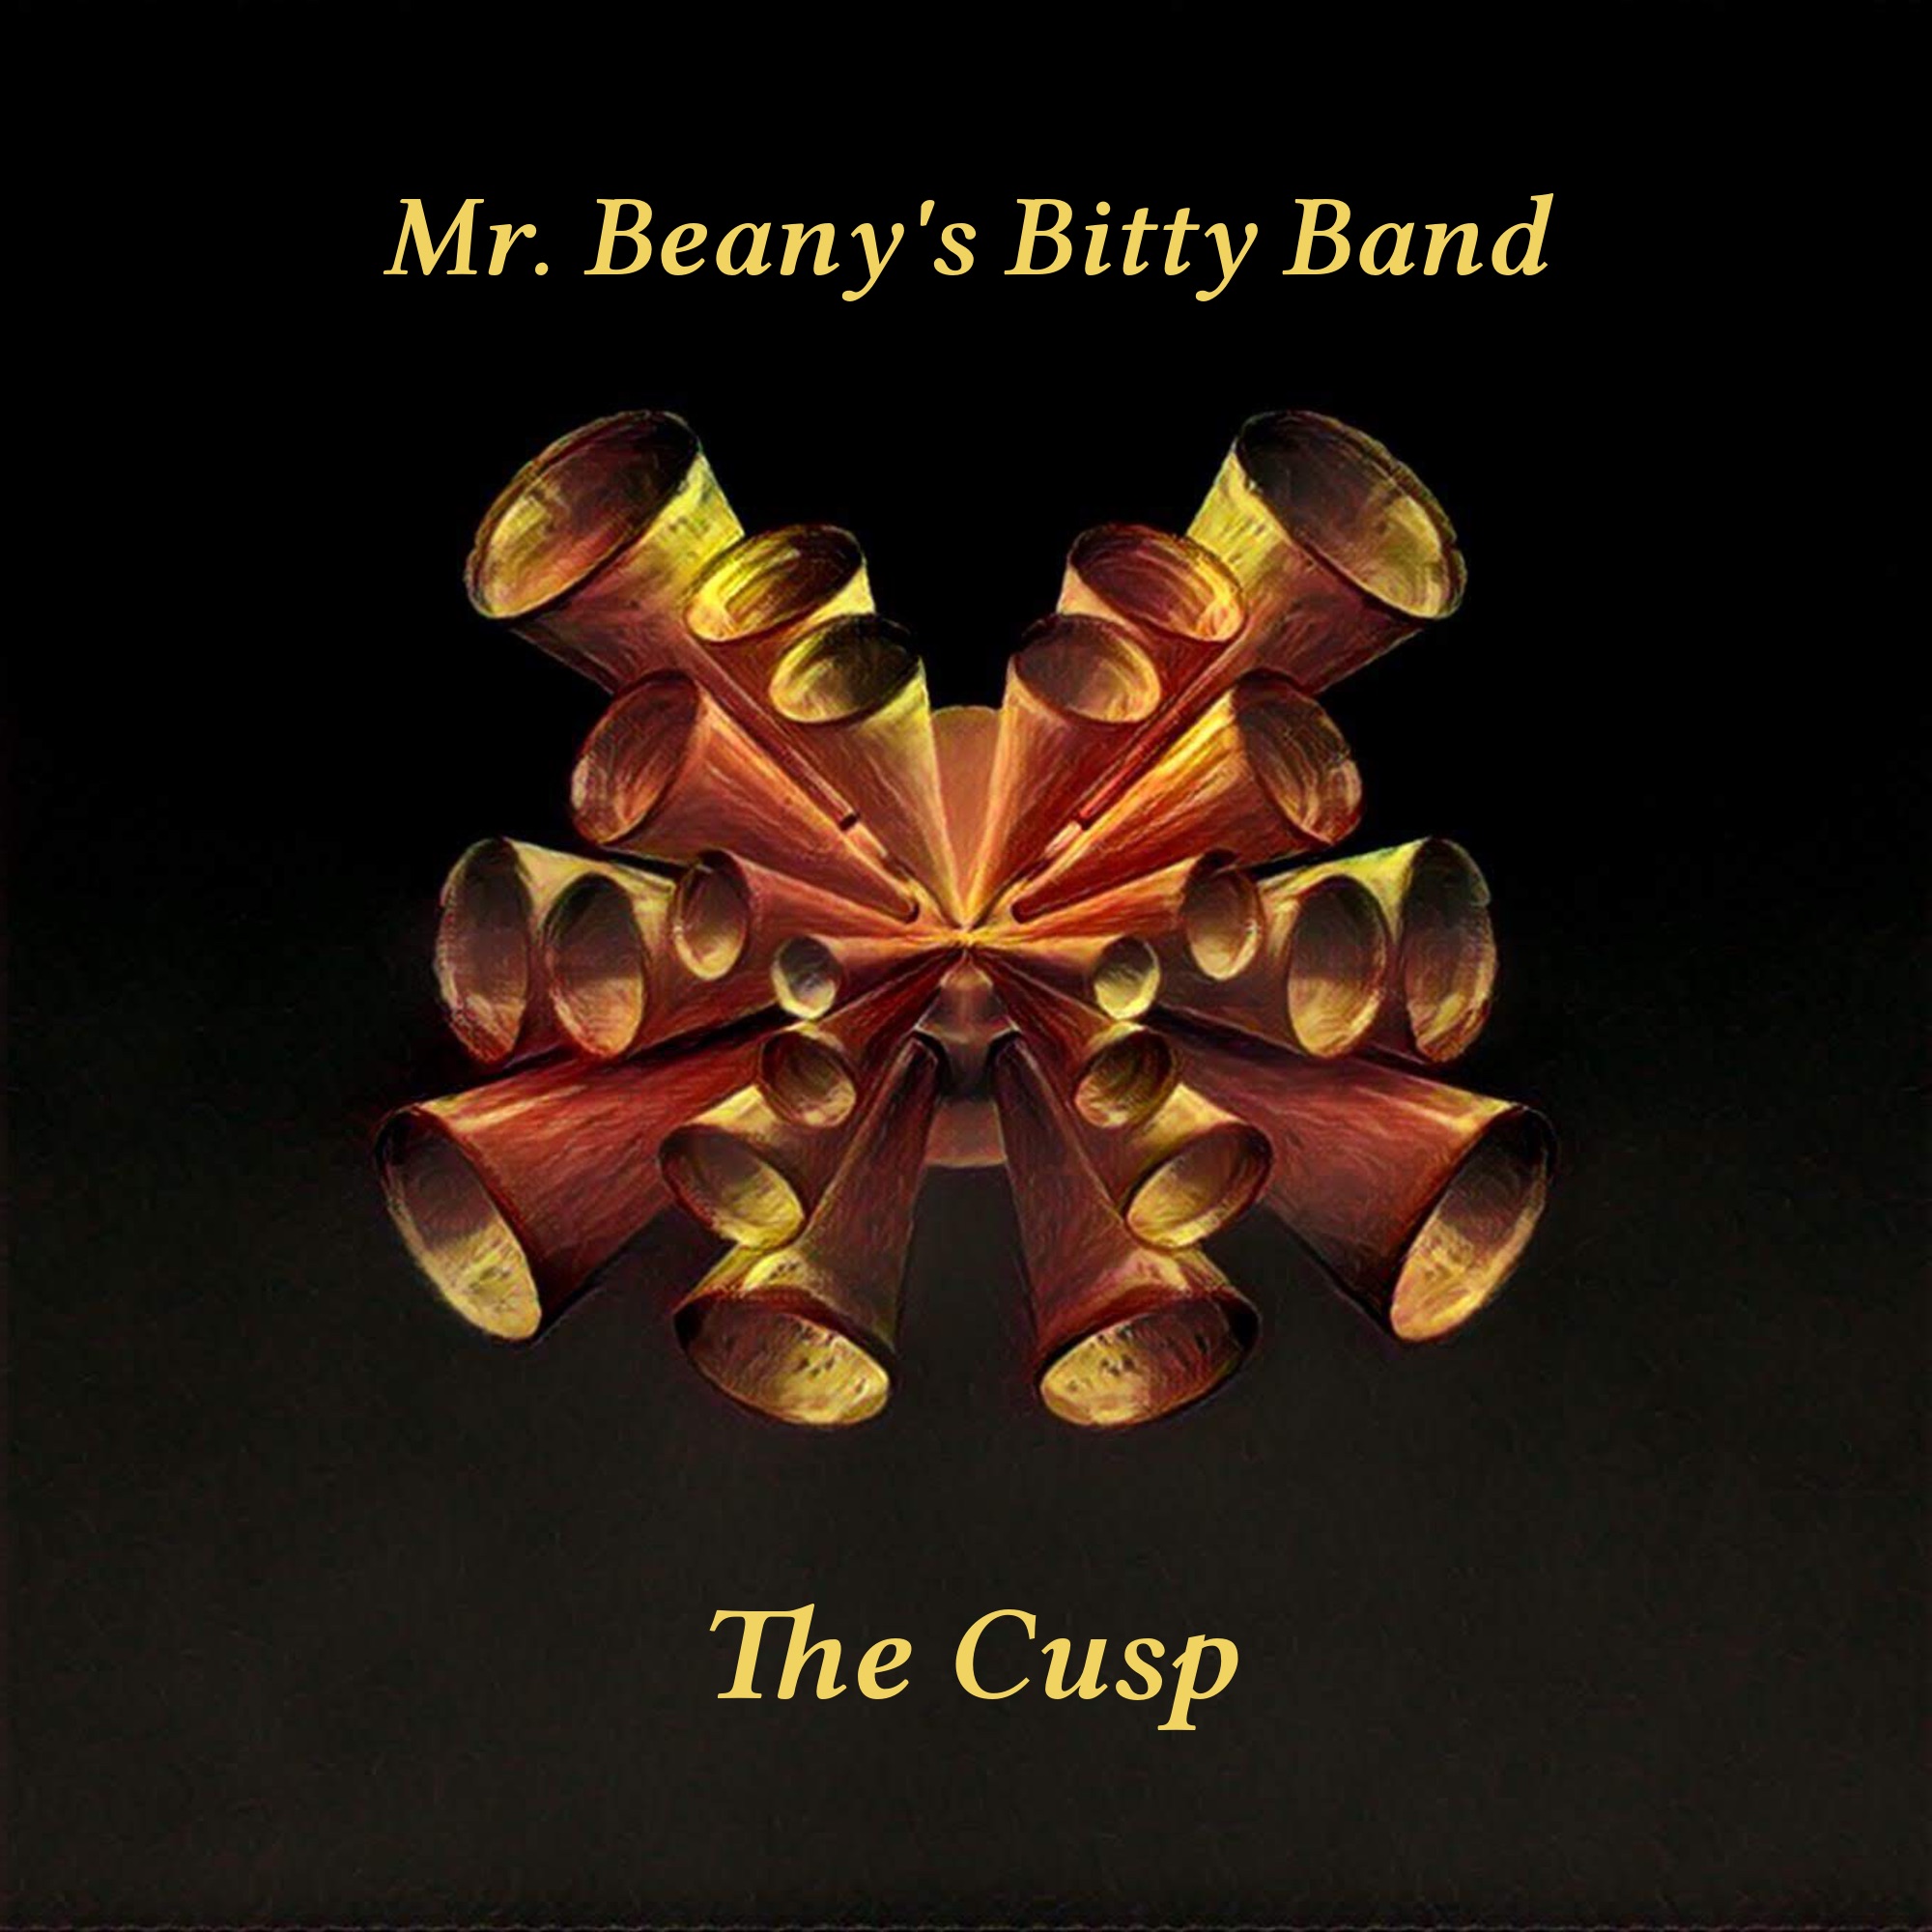 A world-distorted table of cups in an artistic style. The words "The Cusp" and "Mr. Beany's Bitty Band" are present.